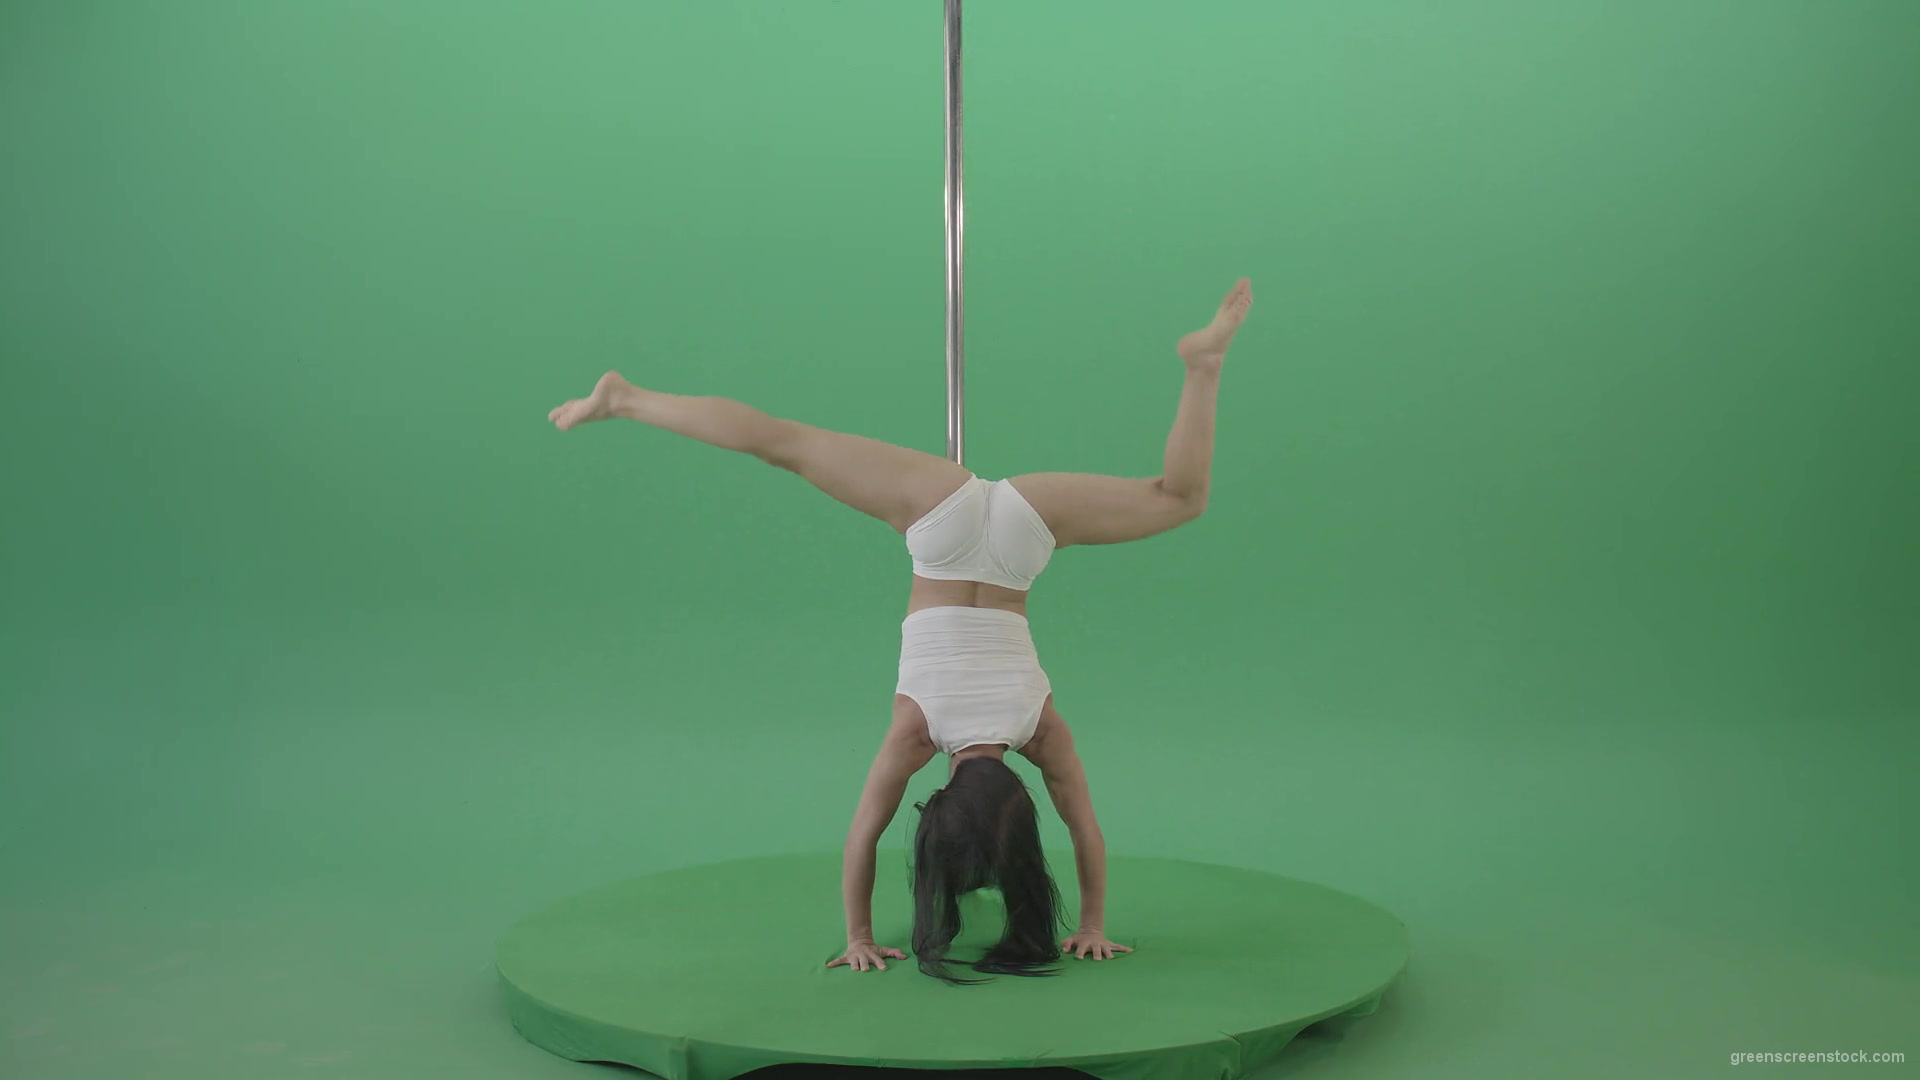 Pole-Dance-Girl-waving-two-legs-isolated-on-green-screen-4K-Video-Footage-1920_008 Green Screen Stock